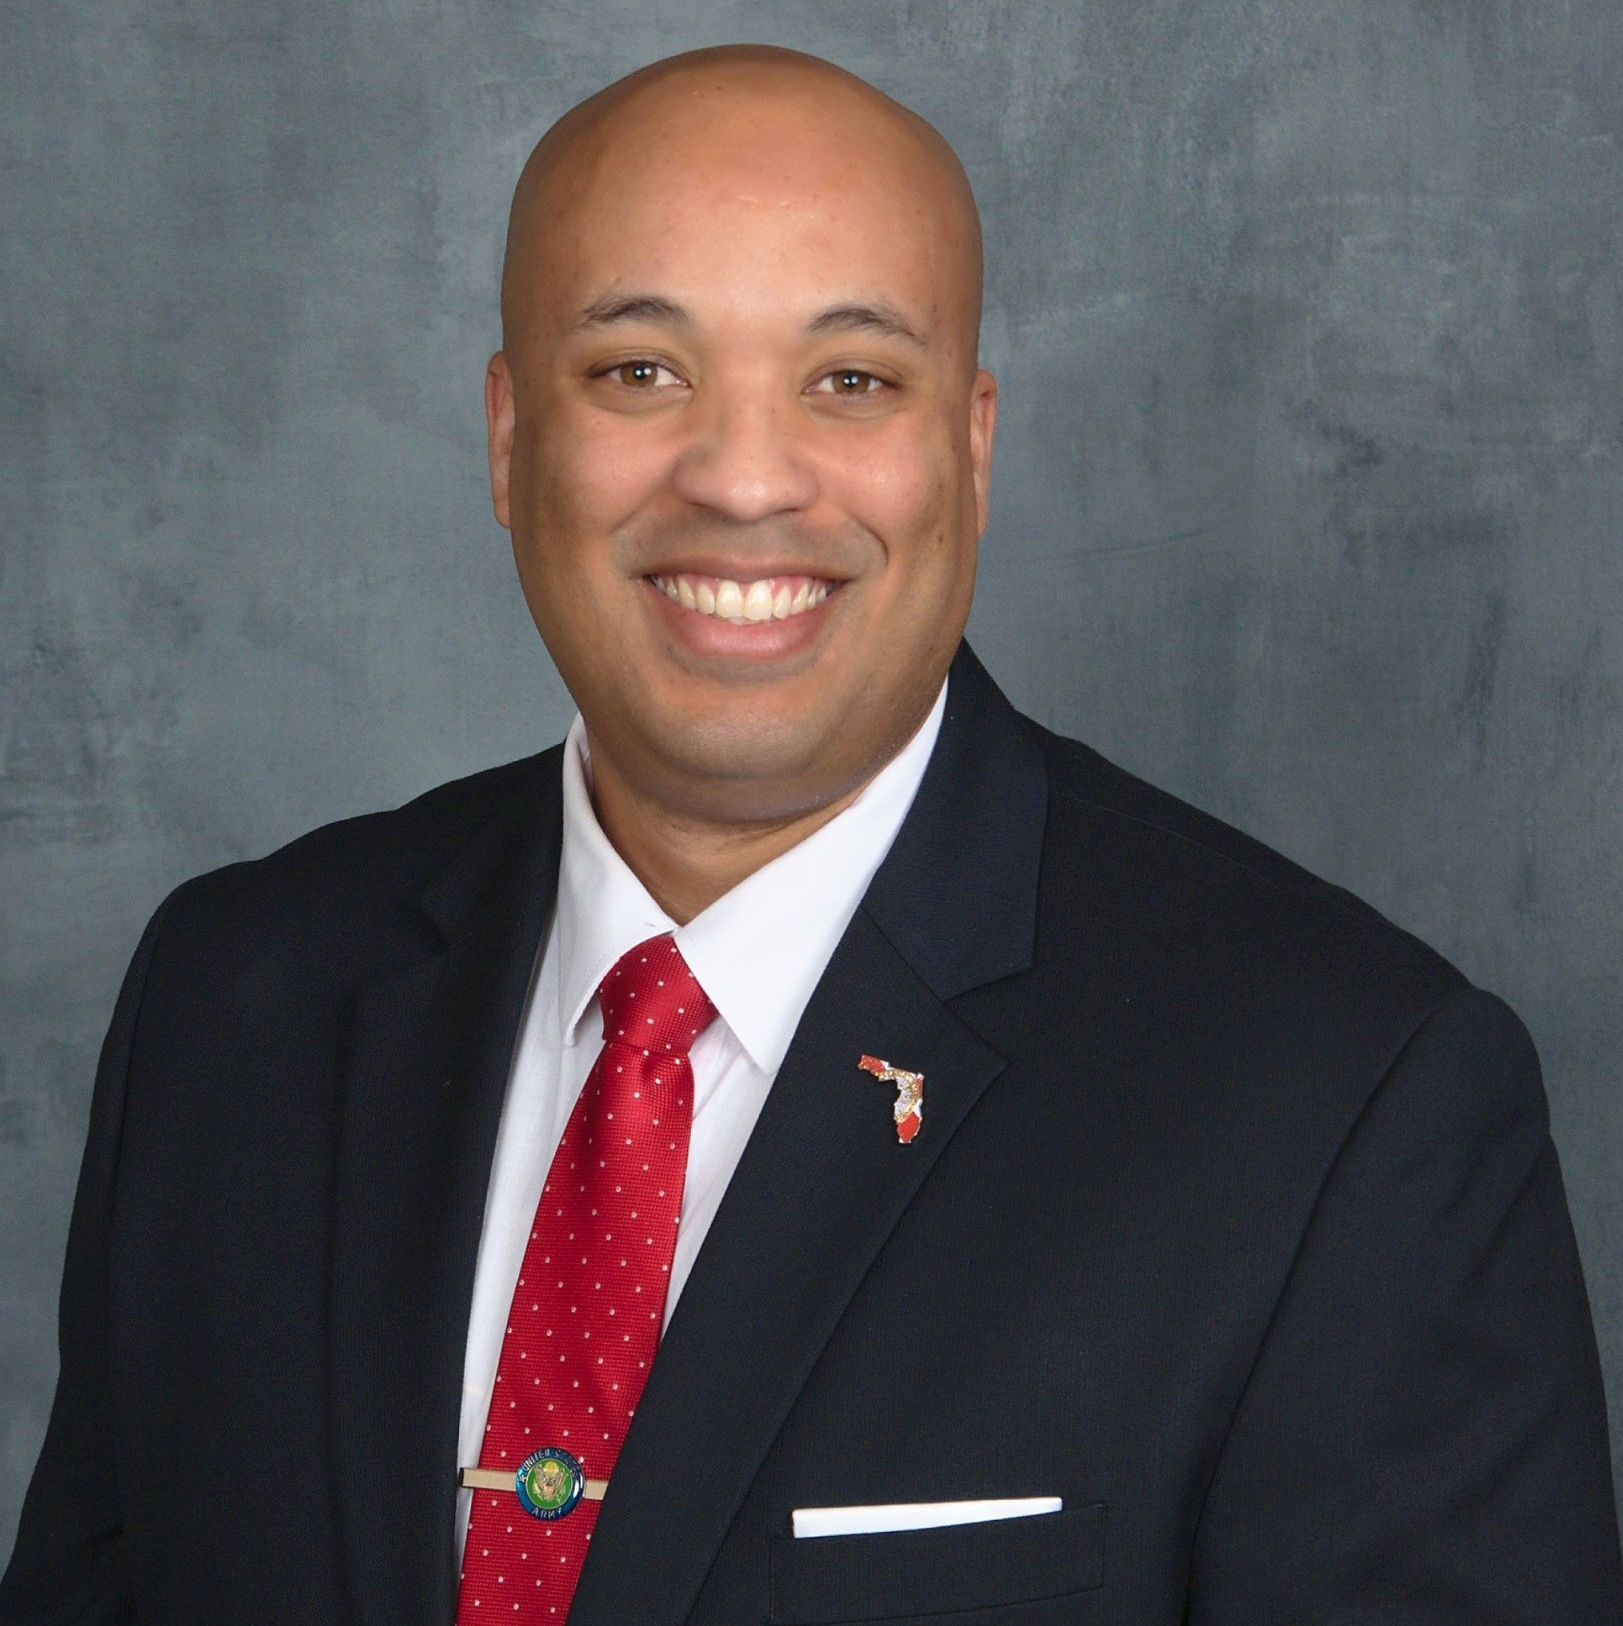 Headshot of Seminole County Supervisor of Elections Christopher Anderson